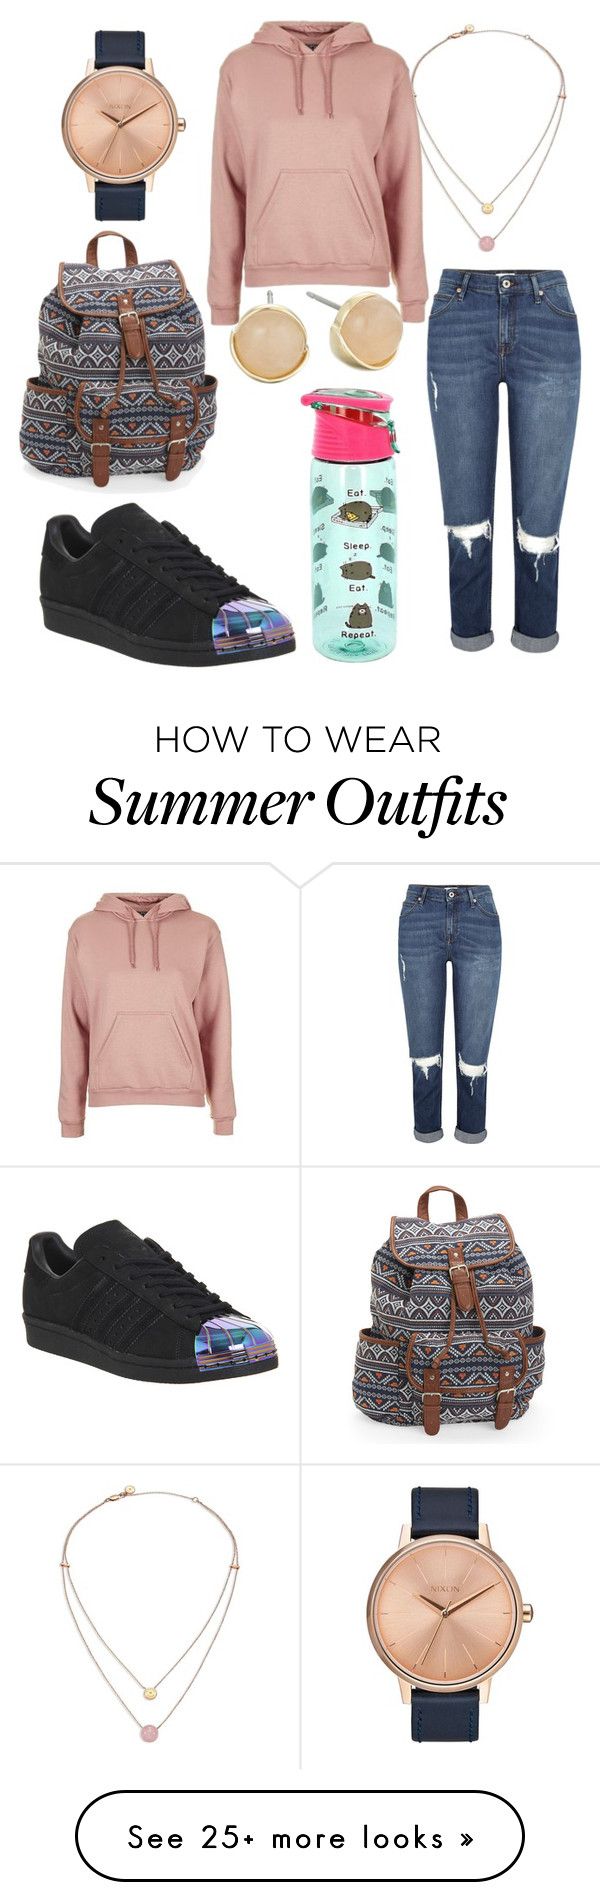 "Casual Everyday Outfit" by stt-g on Polyvore featuring Michael Kors, ...